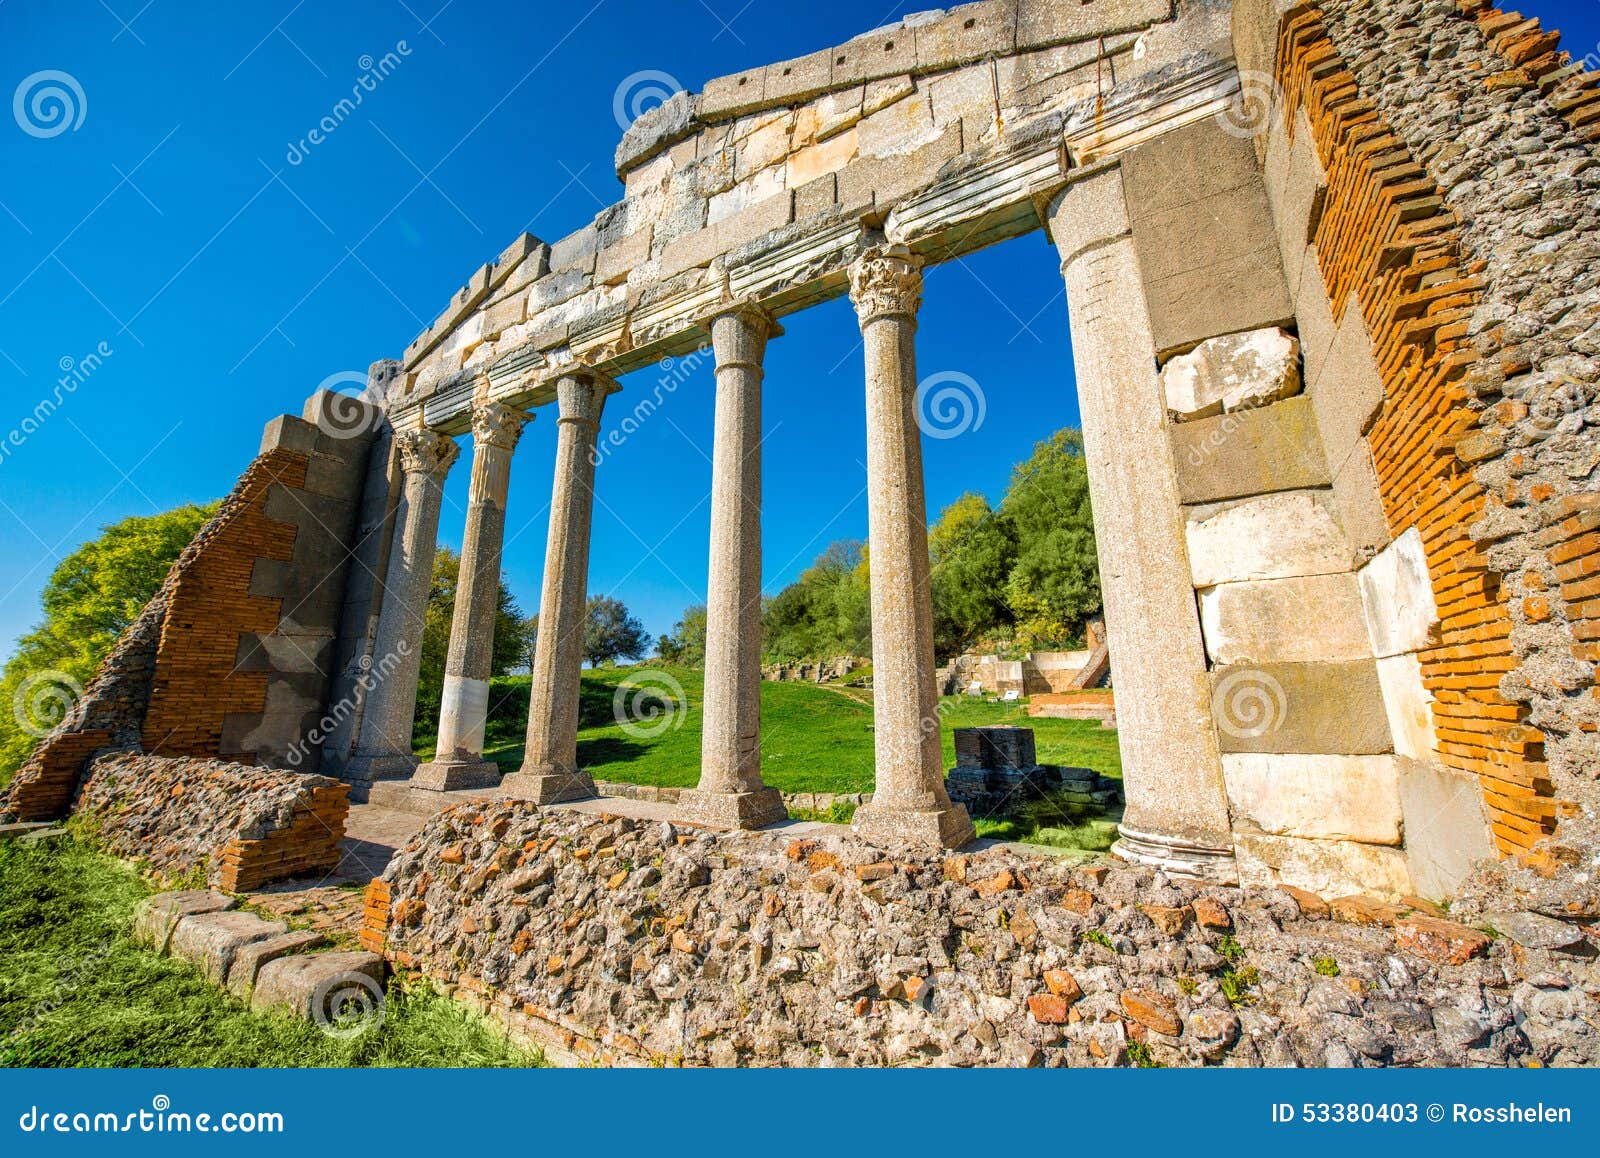 temple ruins in ancient apollonia